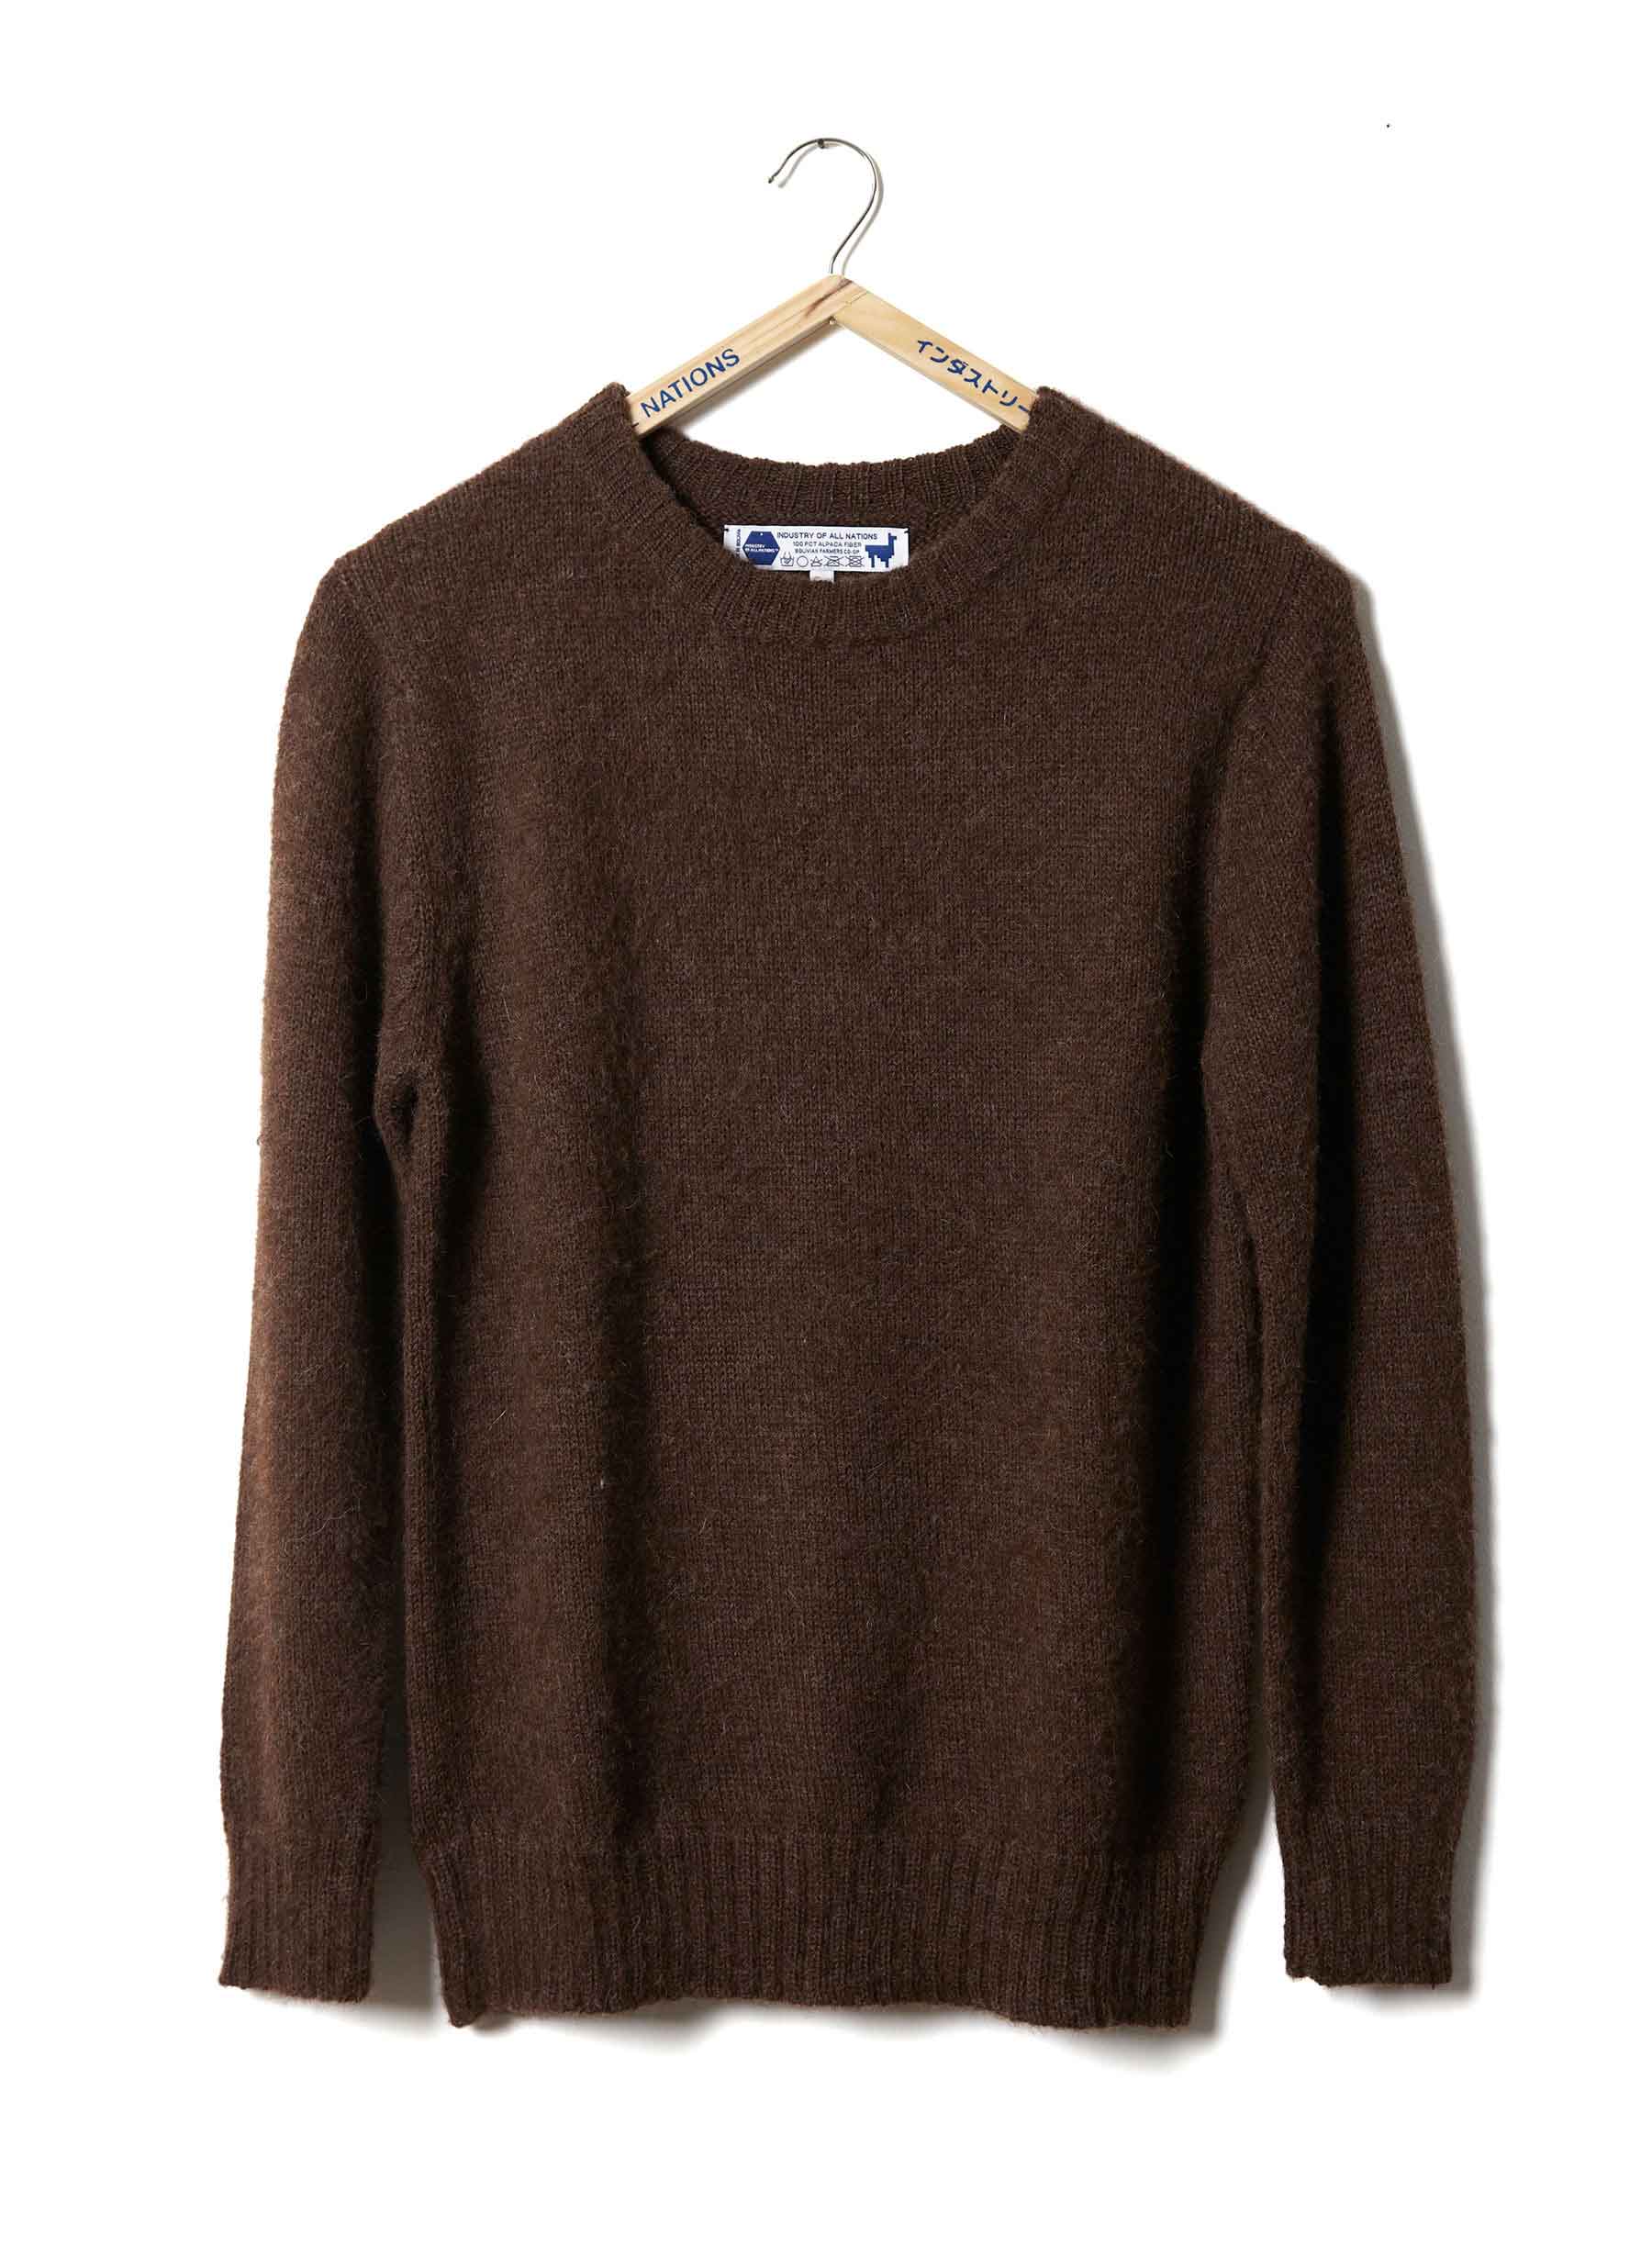 Wear Brown Sweaters and Look Chocolaty in the Super Cool Winter ...